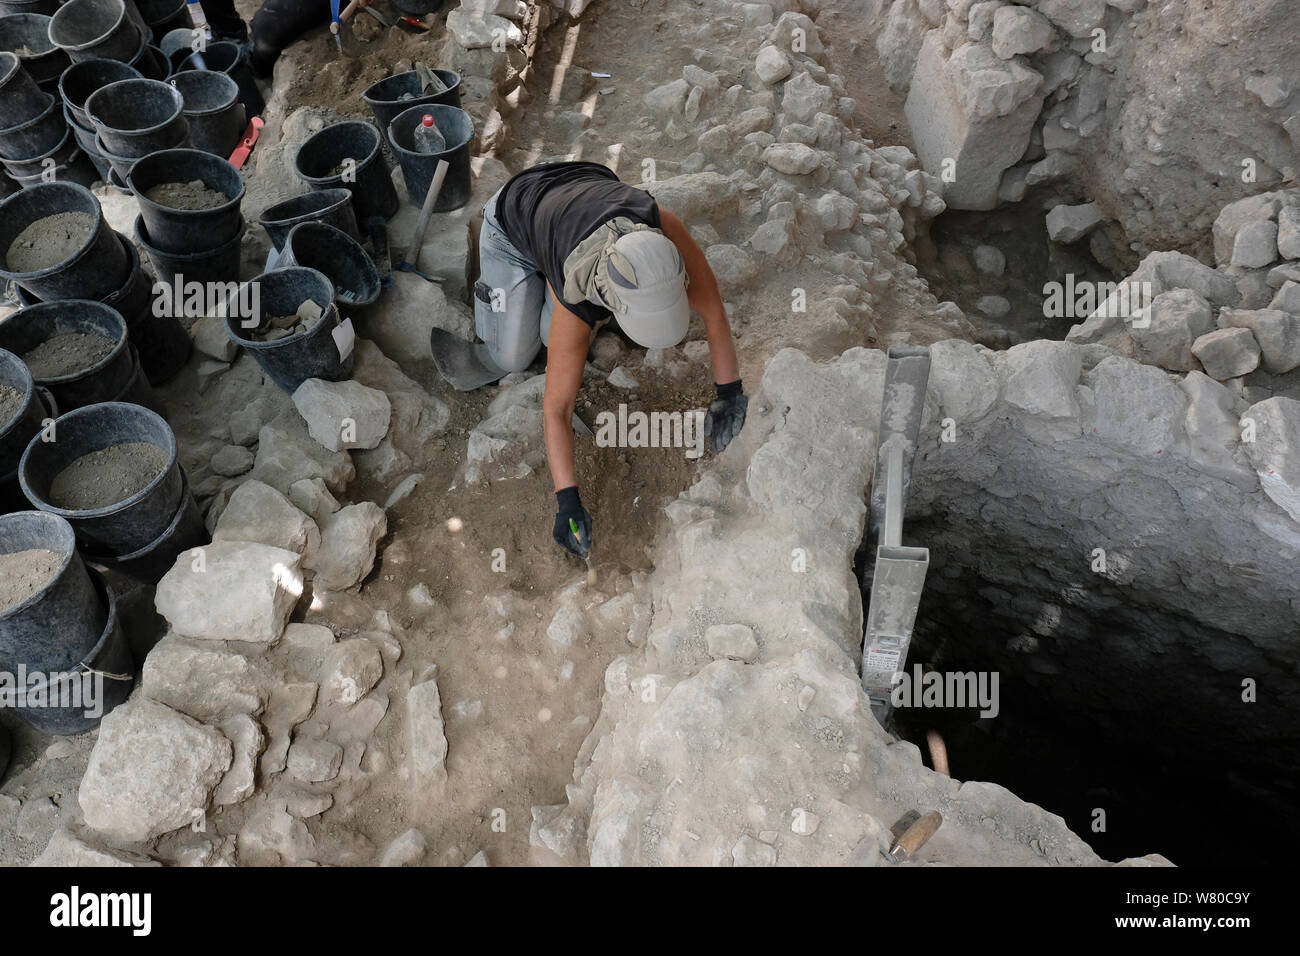 Worker of the Israel Antiquities Authority digging in ruins dating to the Ayyubid period in Ir David or City of David a major archaeological site near the Temple mount in East Jerusalem which is speculated to compose the original urban core of ancient Jerusalem dating to the First Temple period. Israel Stock Photo